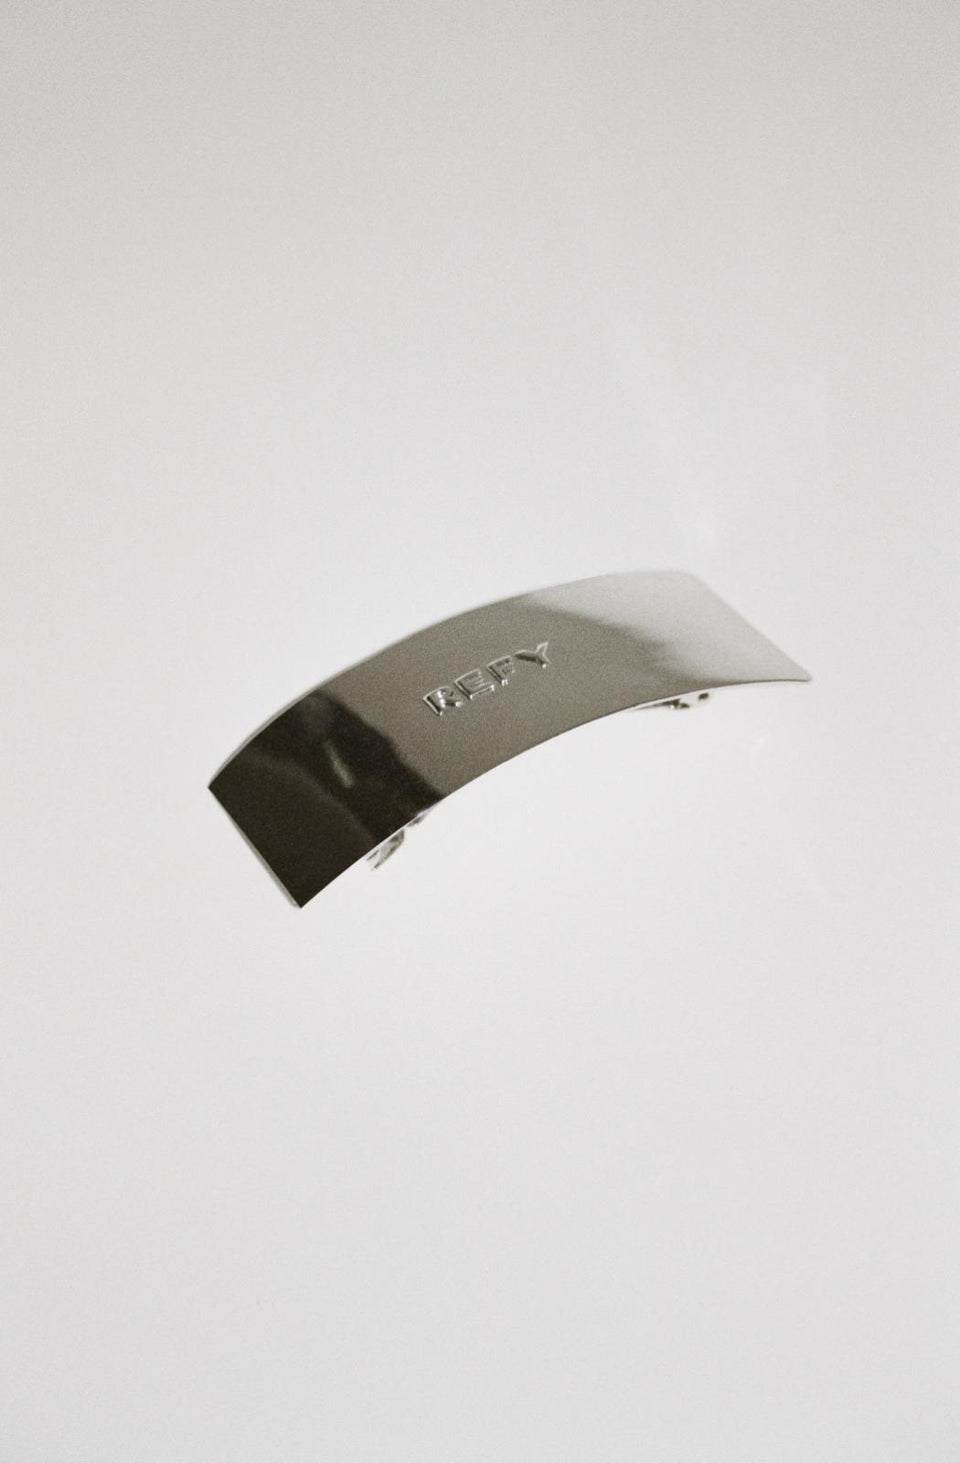  FRONT IMAGE OF REFY METAL RECTANGLE HAIR CLIP